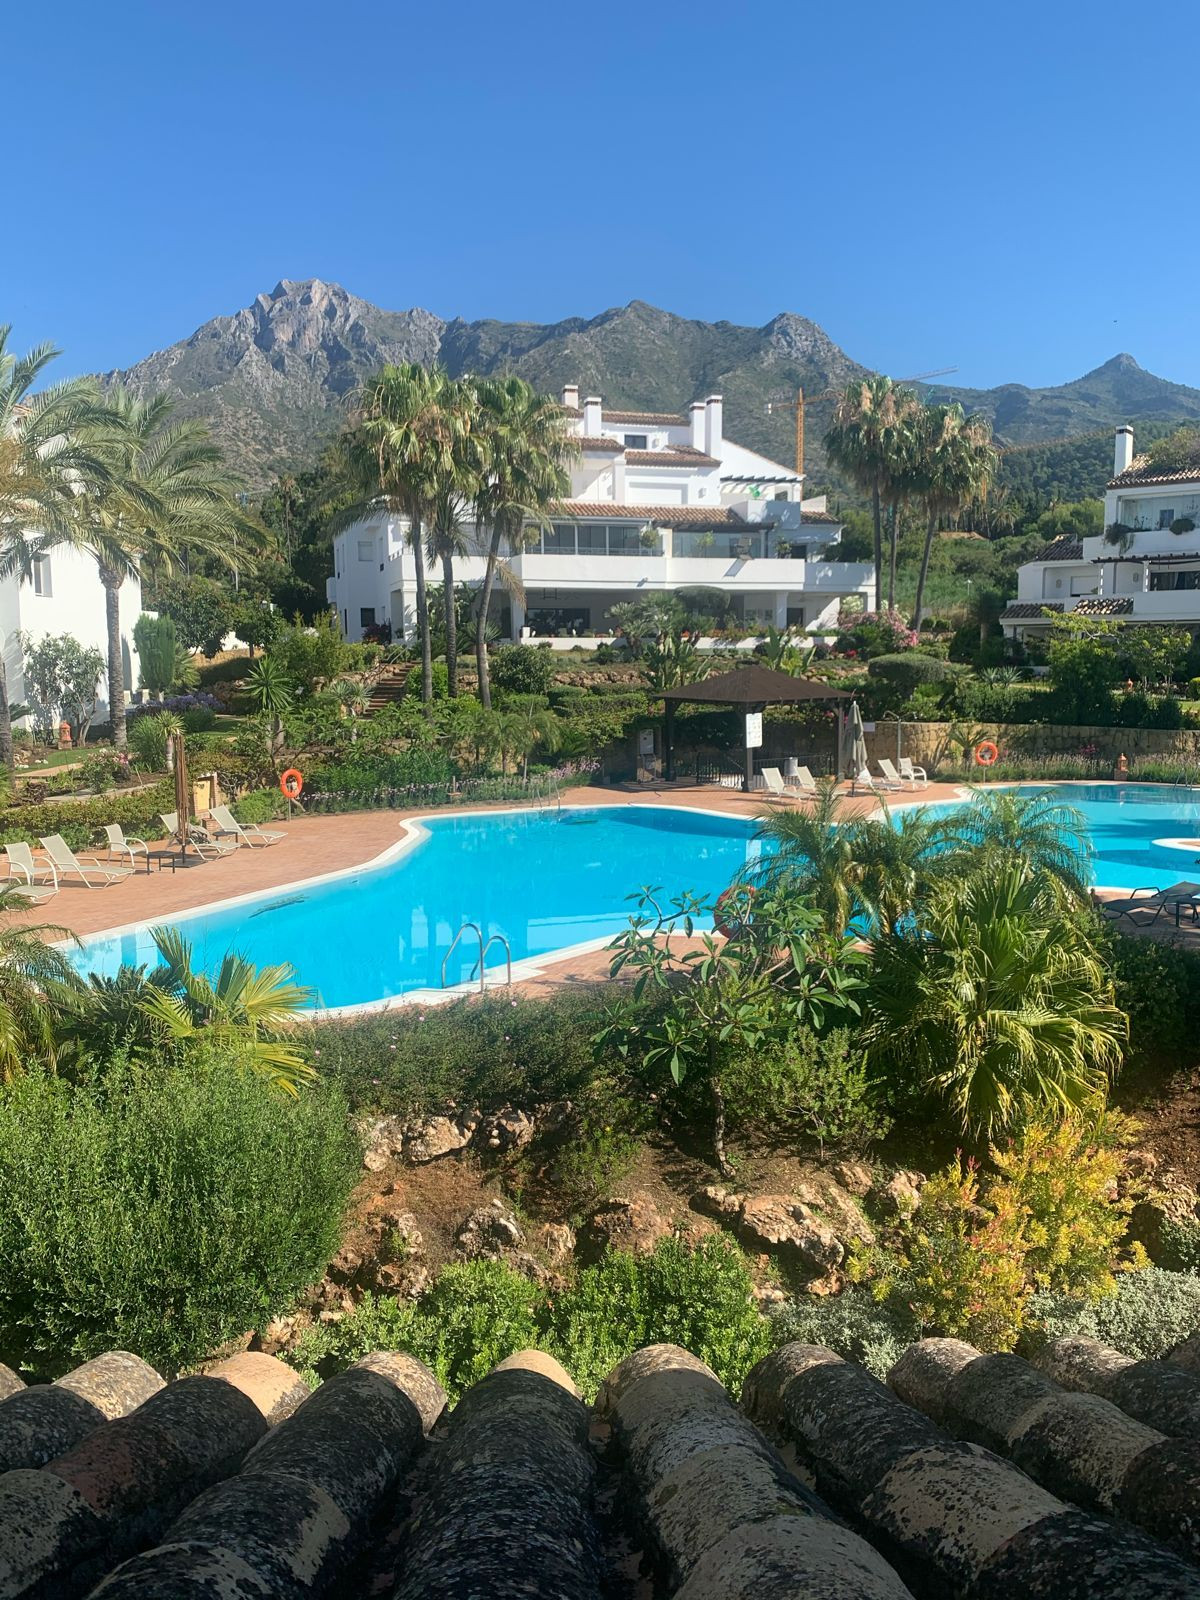 4 Bedroom Apartment for sale Marbella